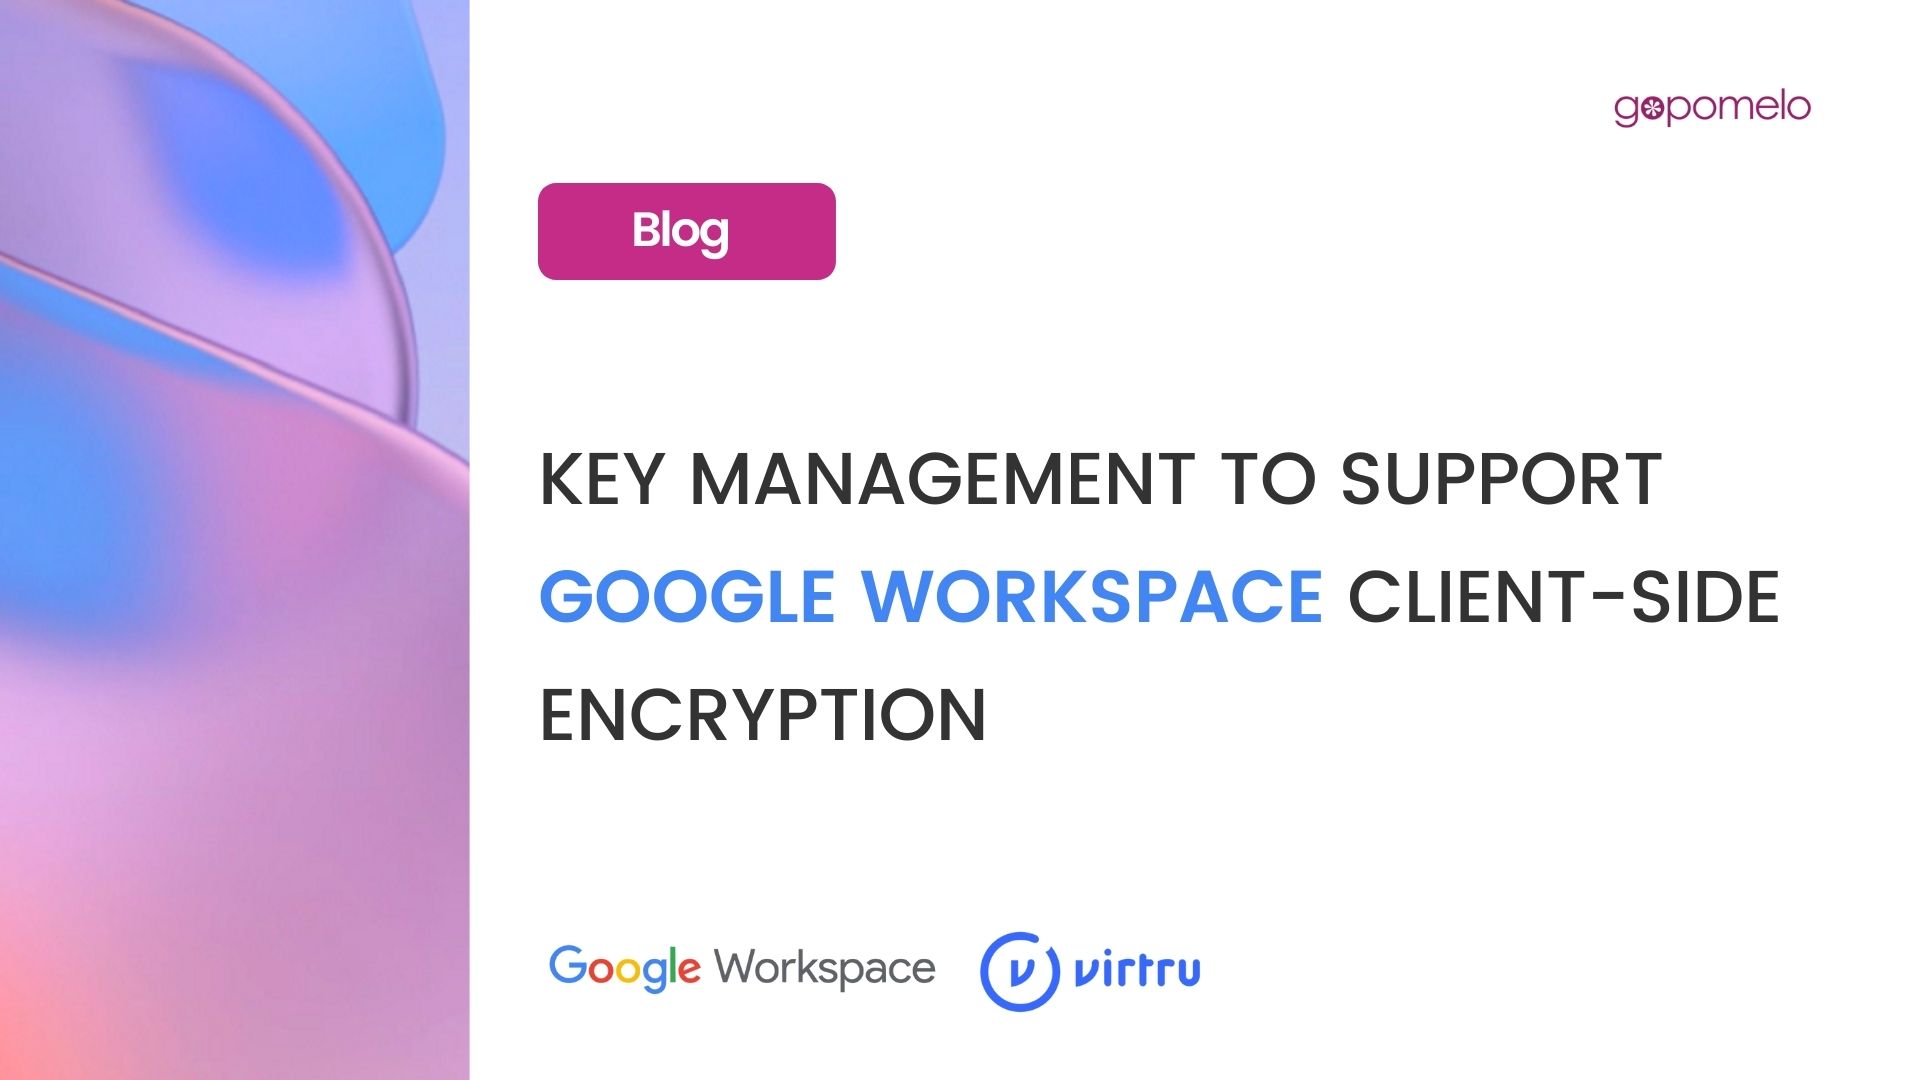 Key Management to Support Google Workspace Client-side encryption